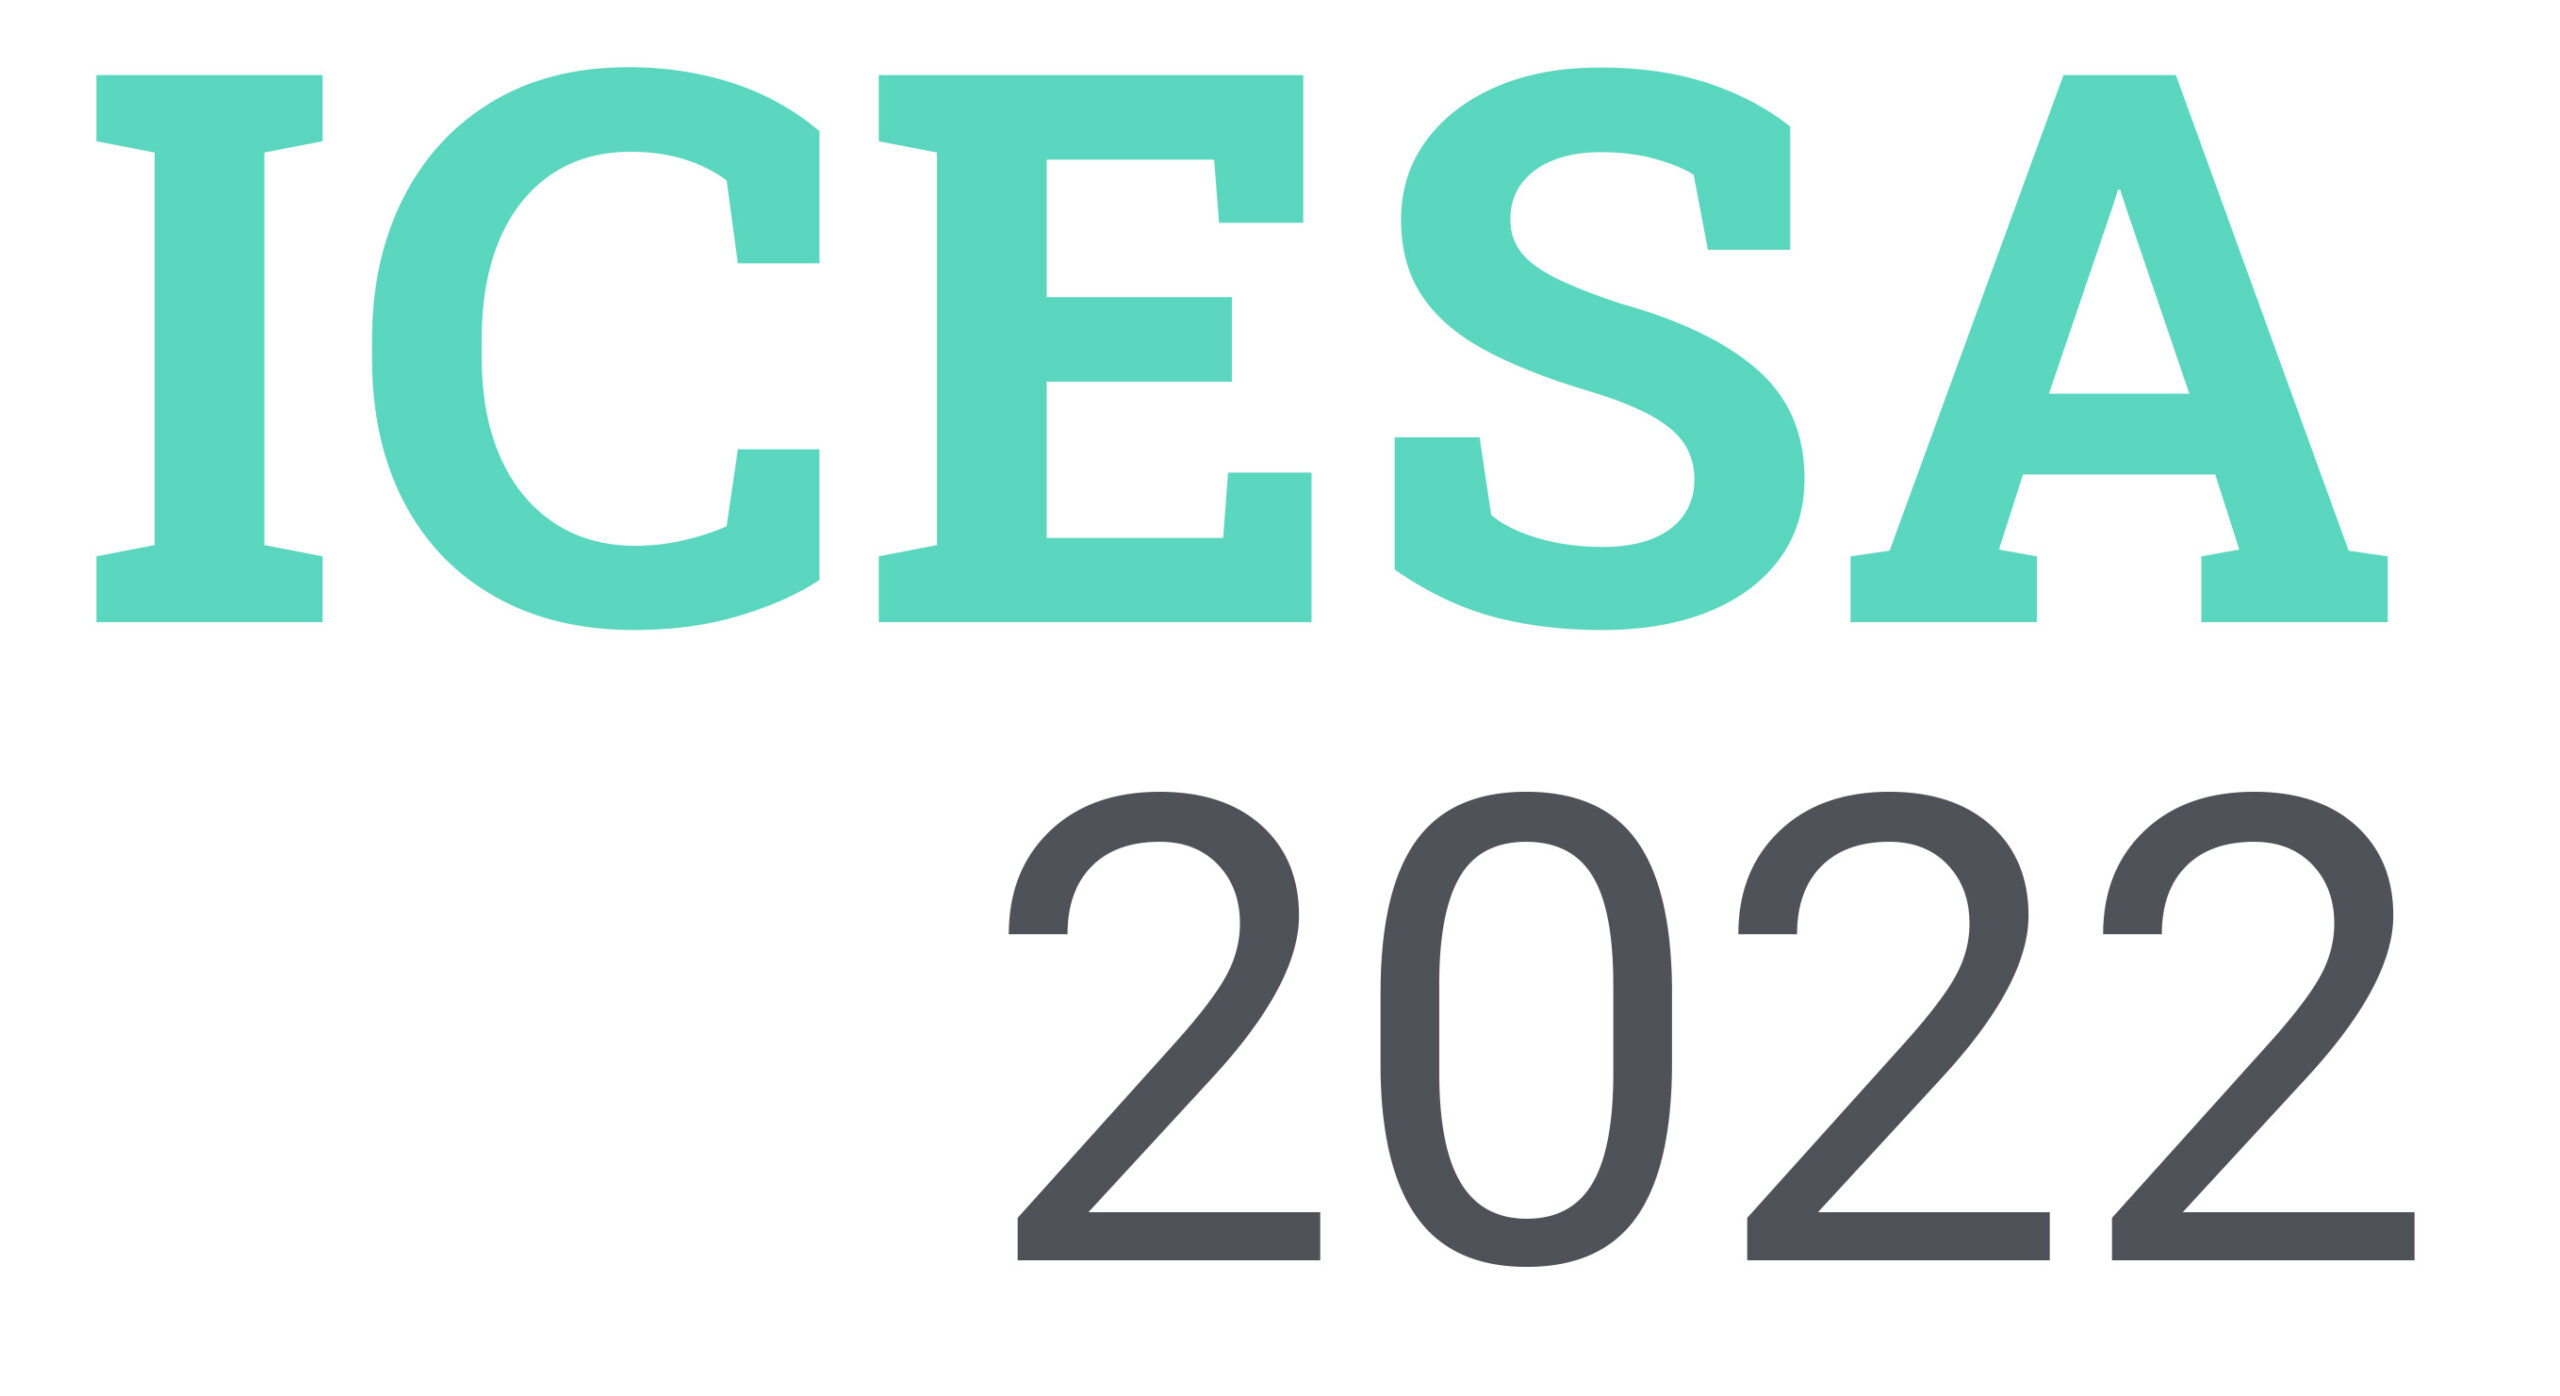 3rd International Conference on Environmental Science and Applications (ICESA’22)